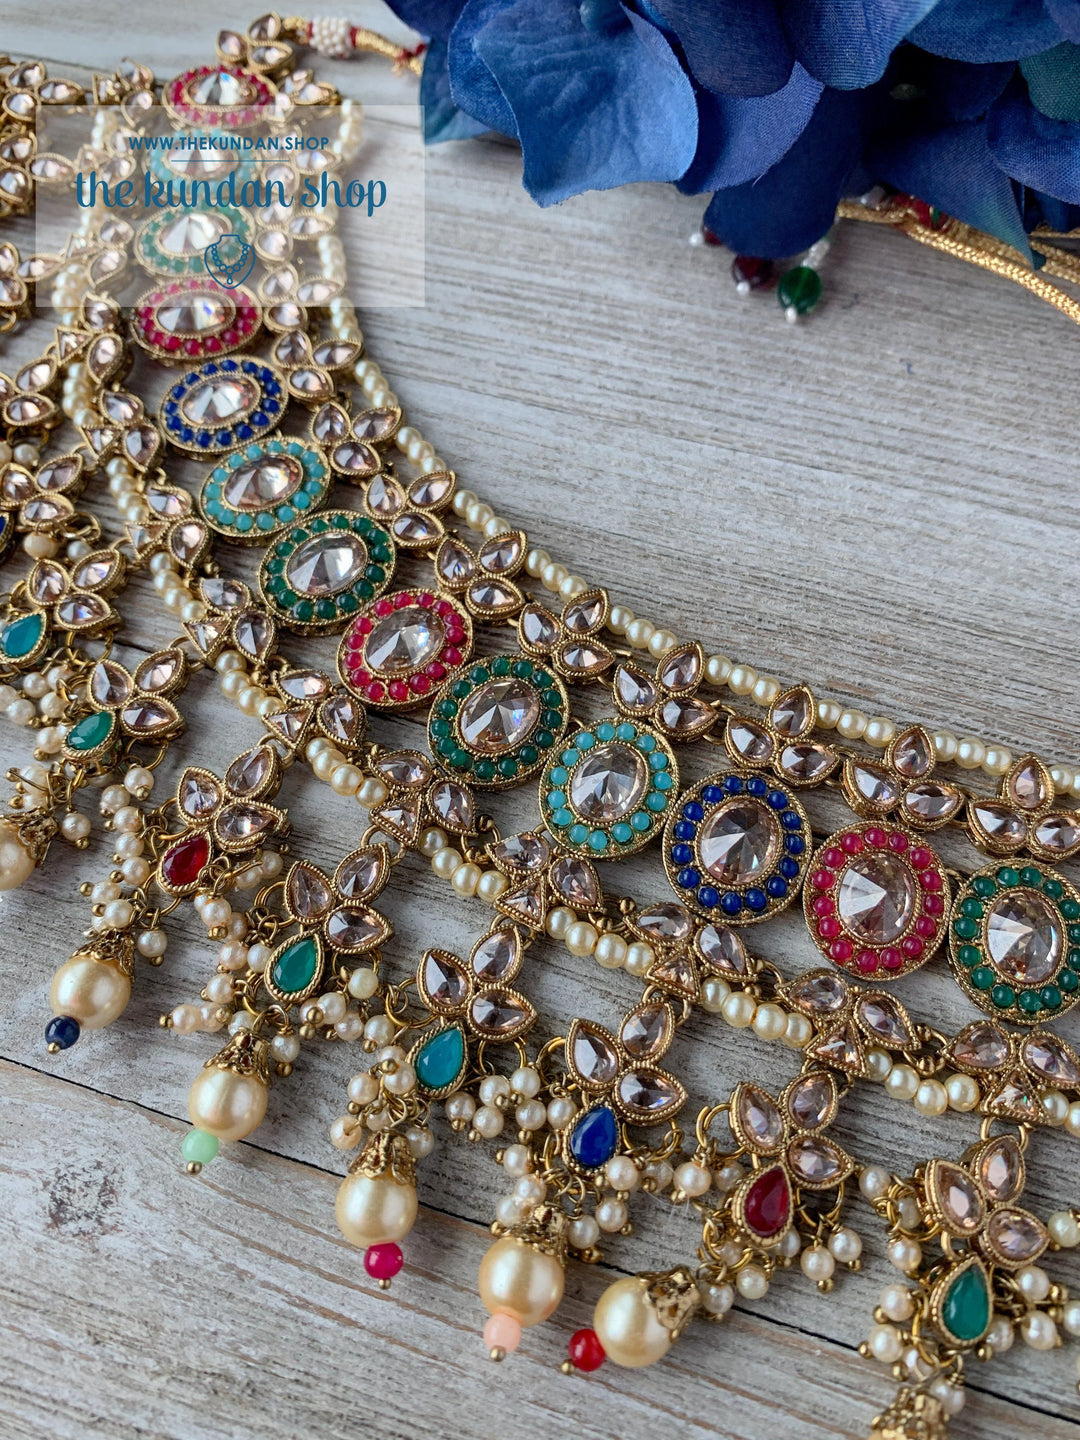 Dignify Set in Multi Necklace Sets THE KUNDAN SHOP 